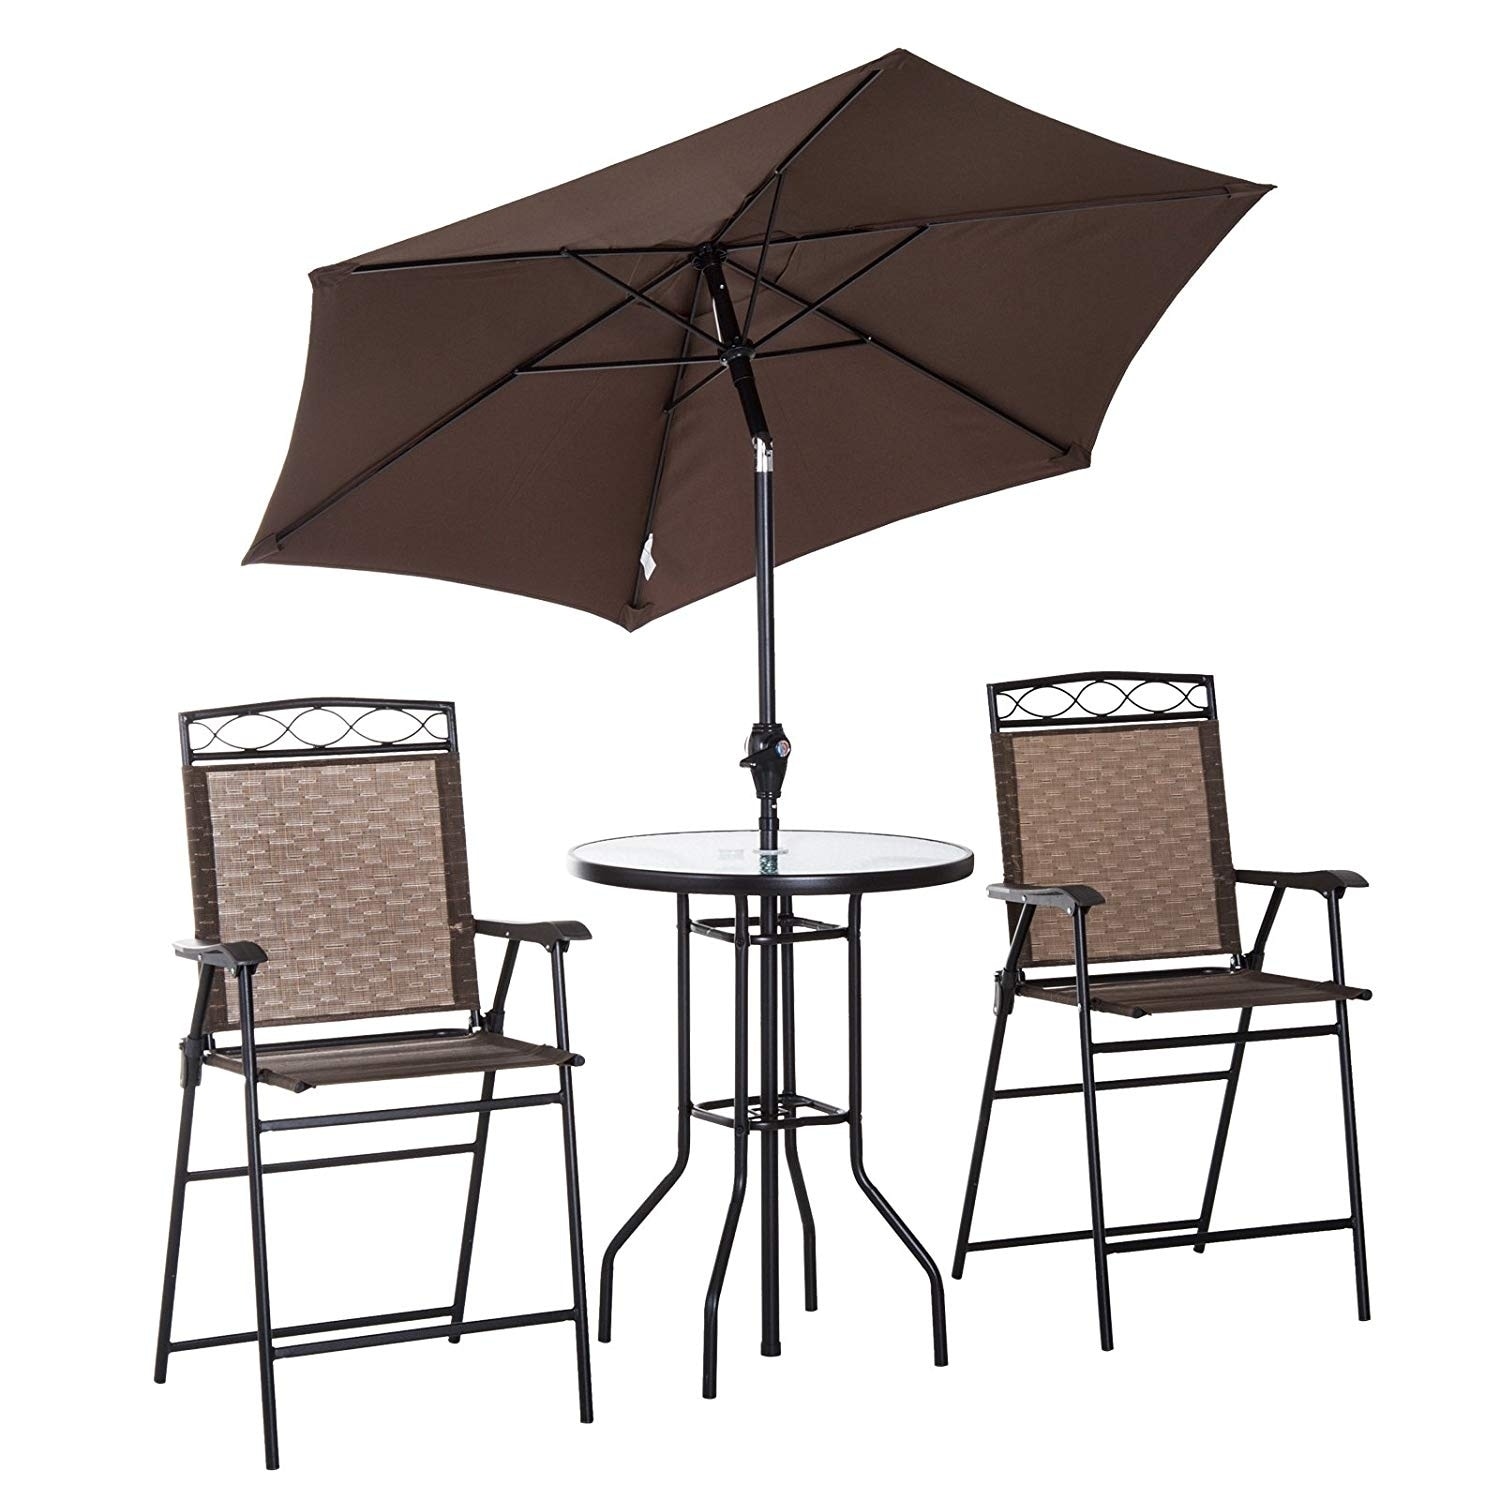 Outsunny 4 Piece Folding Outdoor Patio Pub Dining Table And Chairs Set With 6 Adjustable Tilt Umbrella 74a7f6a3 9618 4ec5 84d8 977934fc641f 